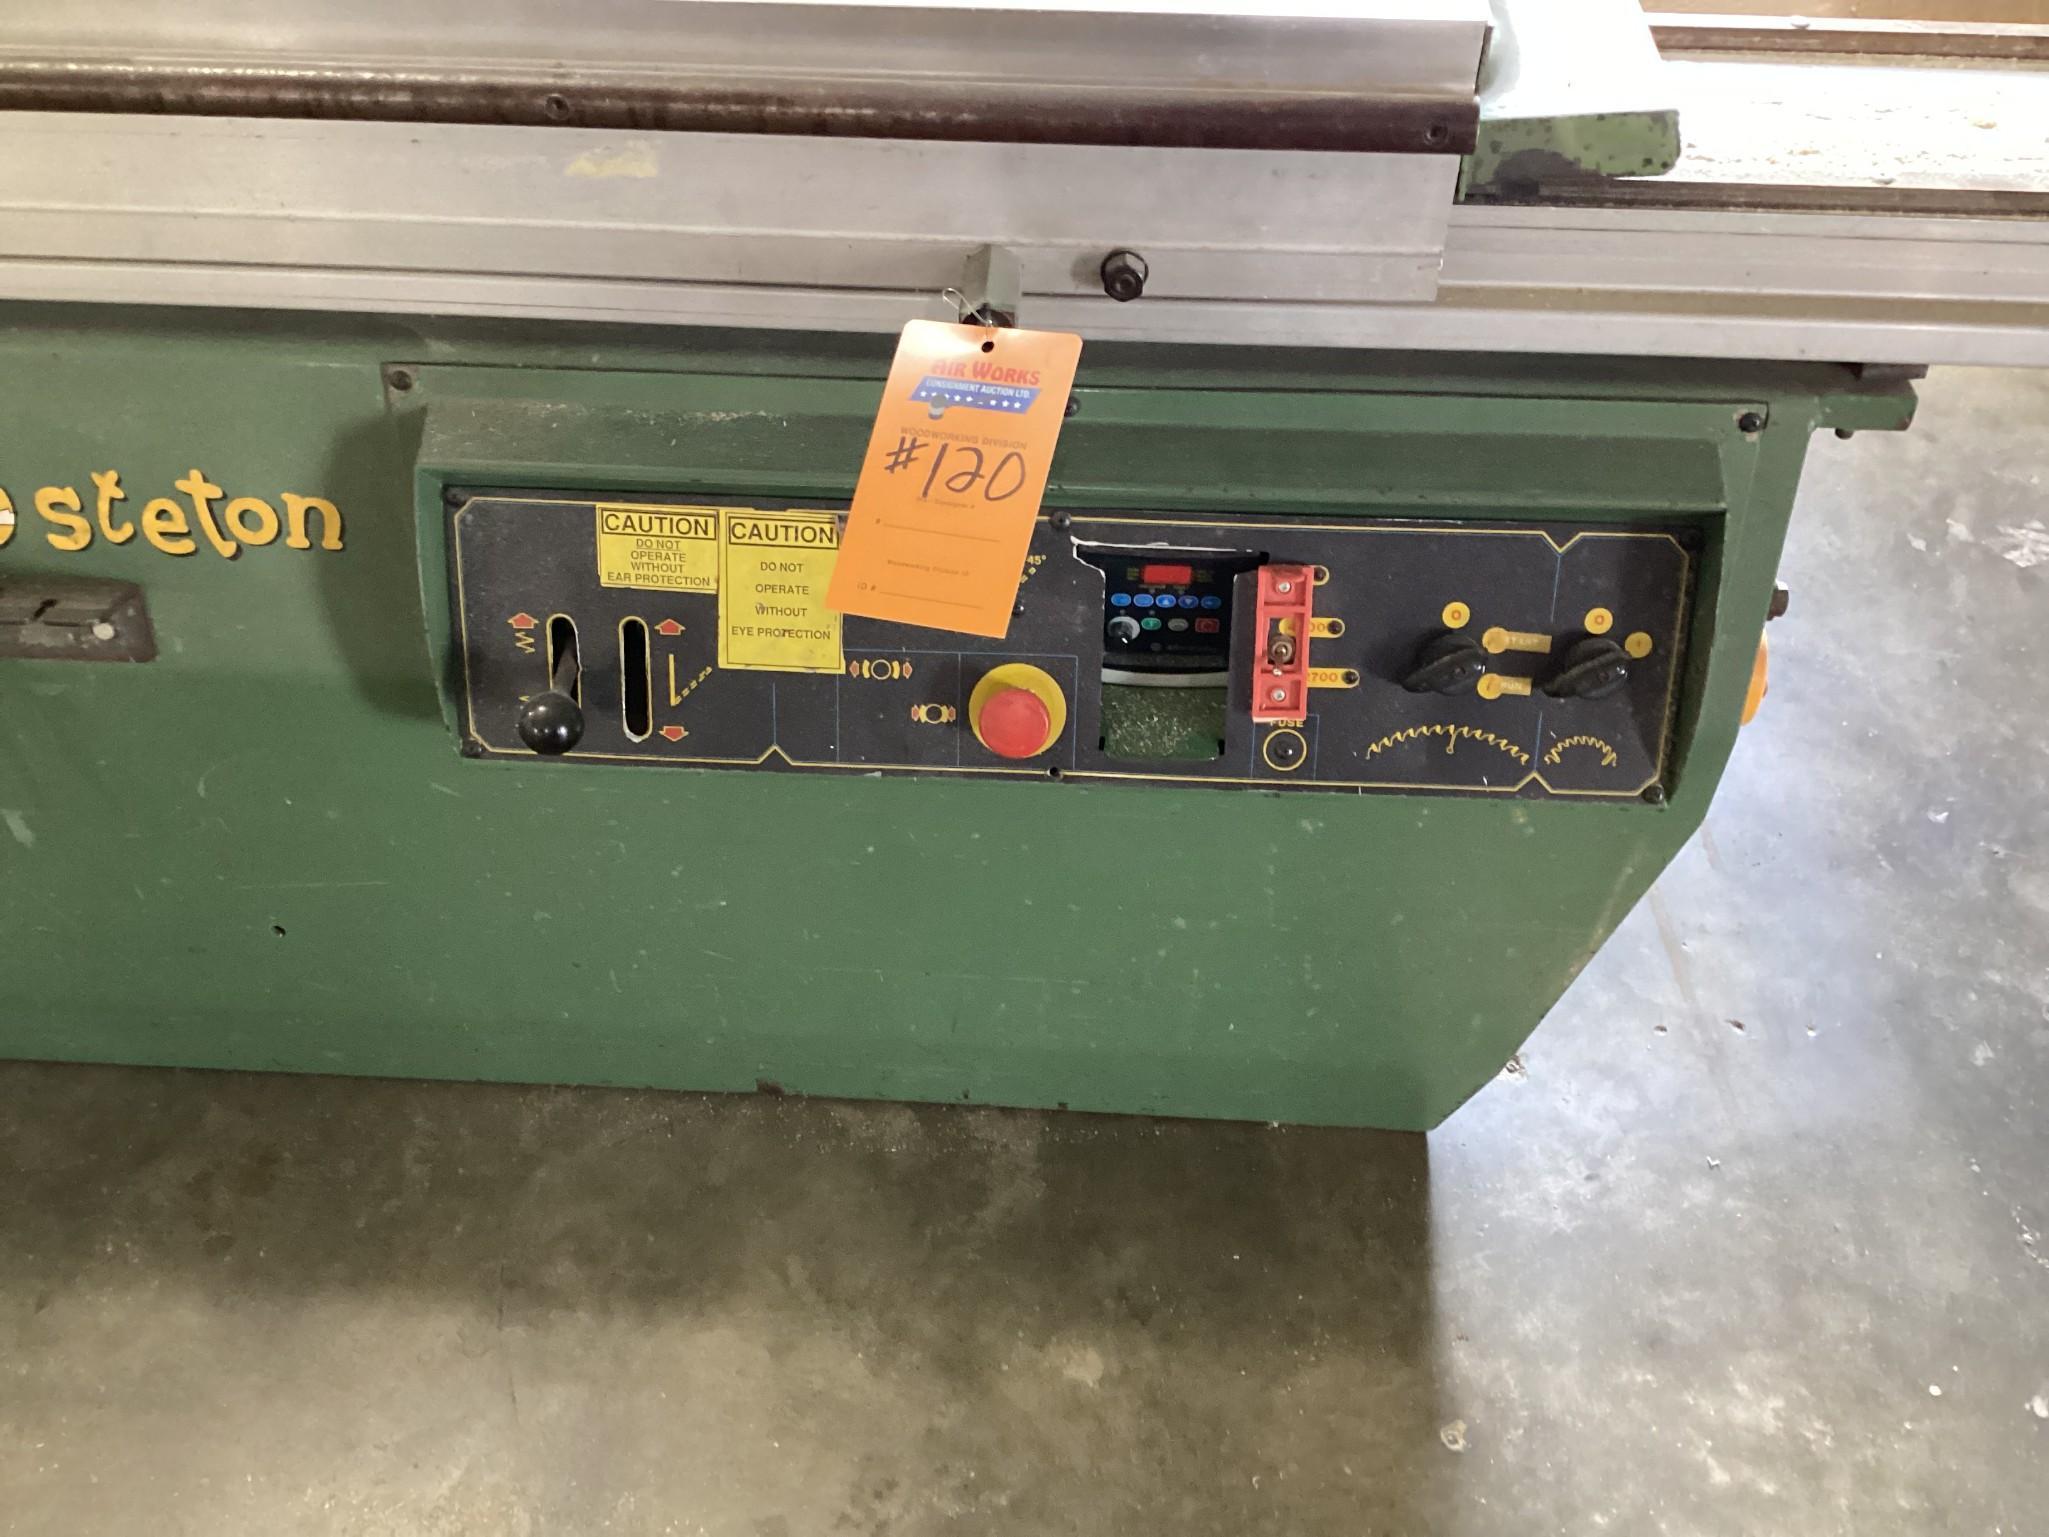 Steton SC 400/3200 Sliding Table Saw Hydraulic Powered, In Excellent Working Condition